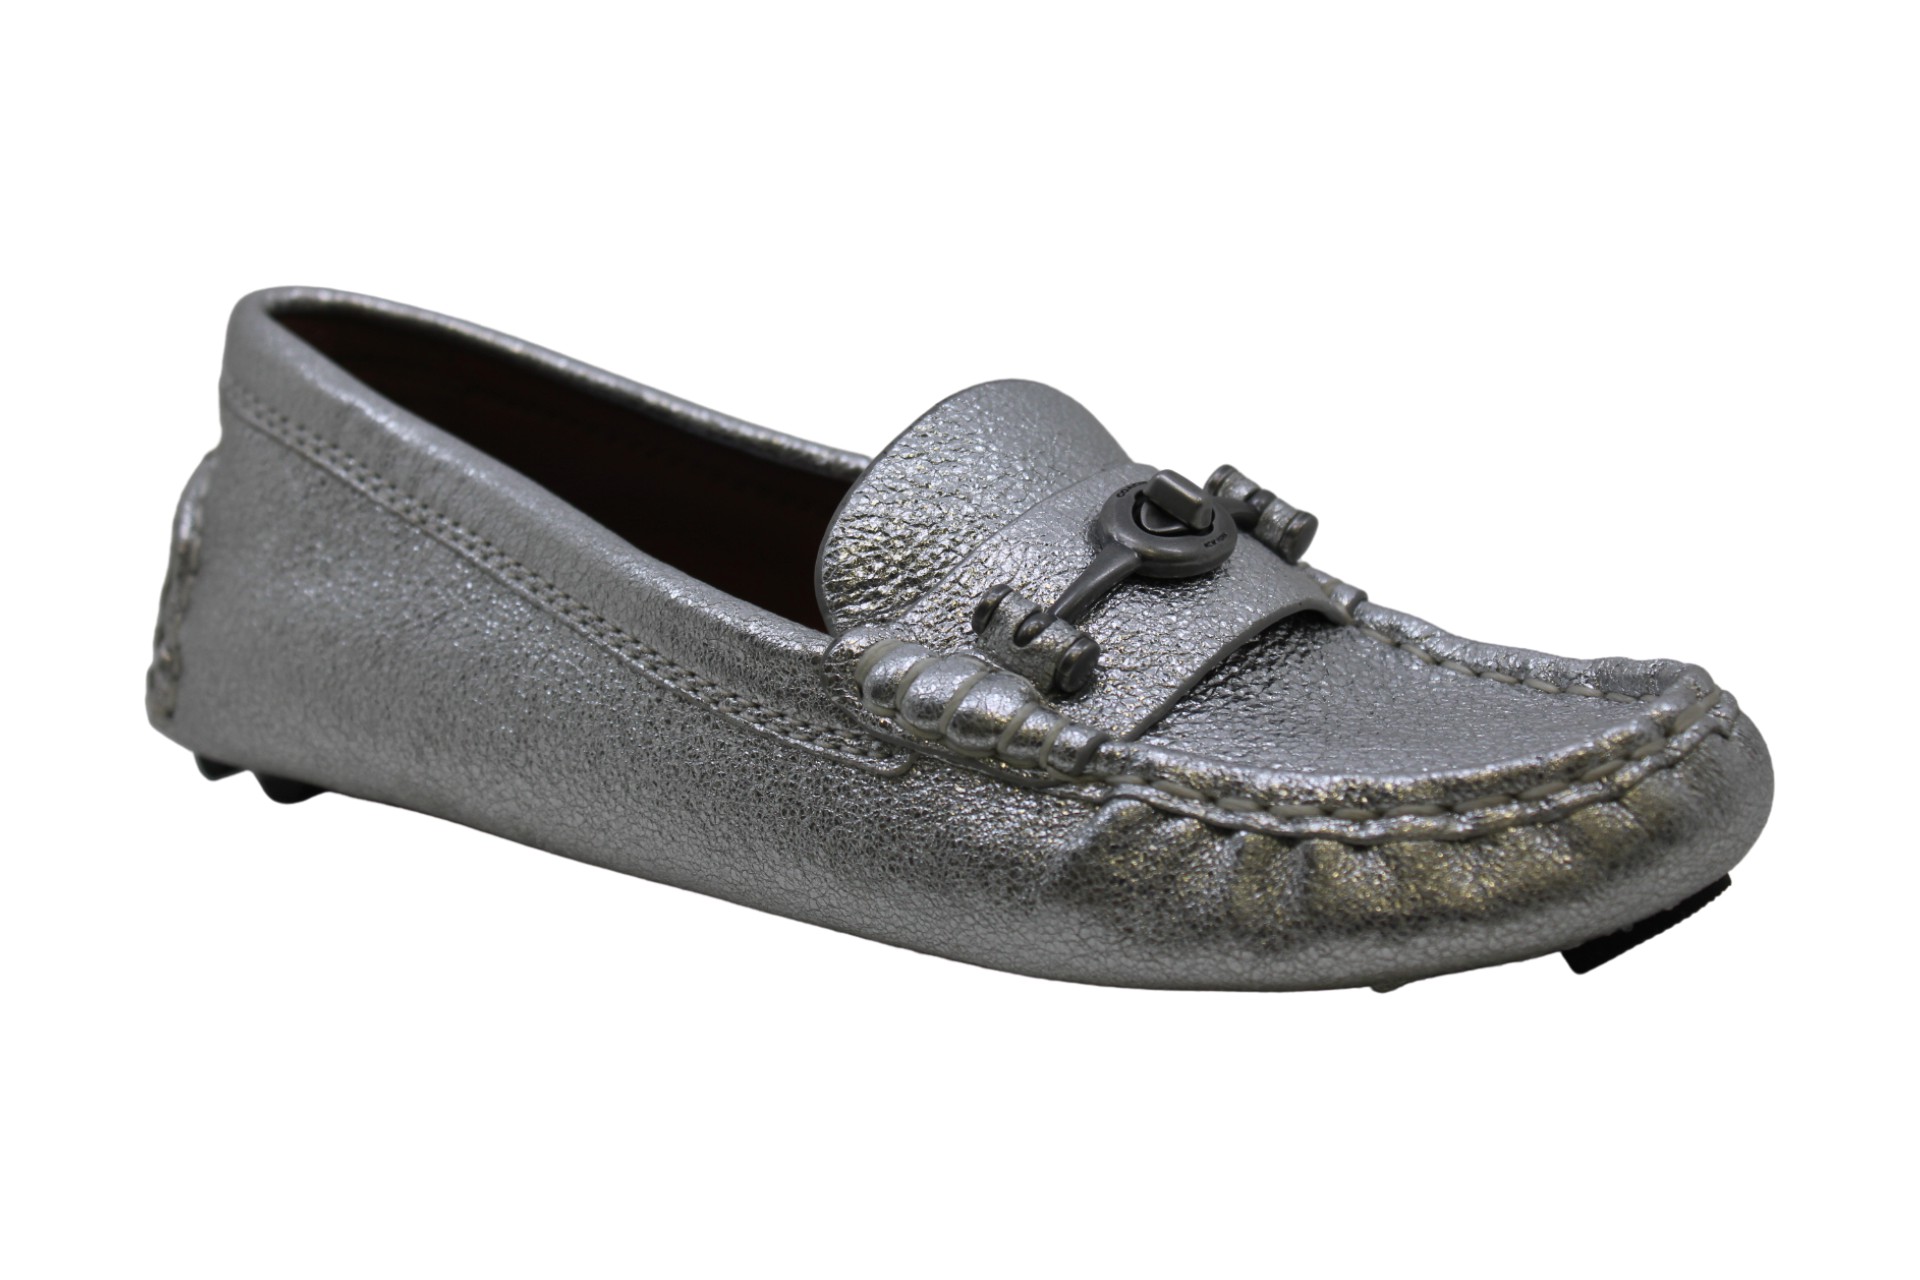 Coach Womens Crosby Closed Toe Loafers, Silver, Size 5.5 | eBay